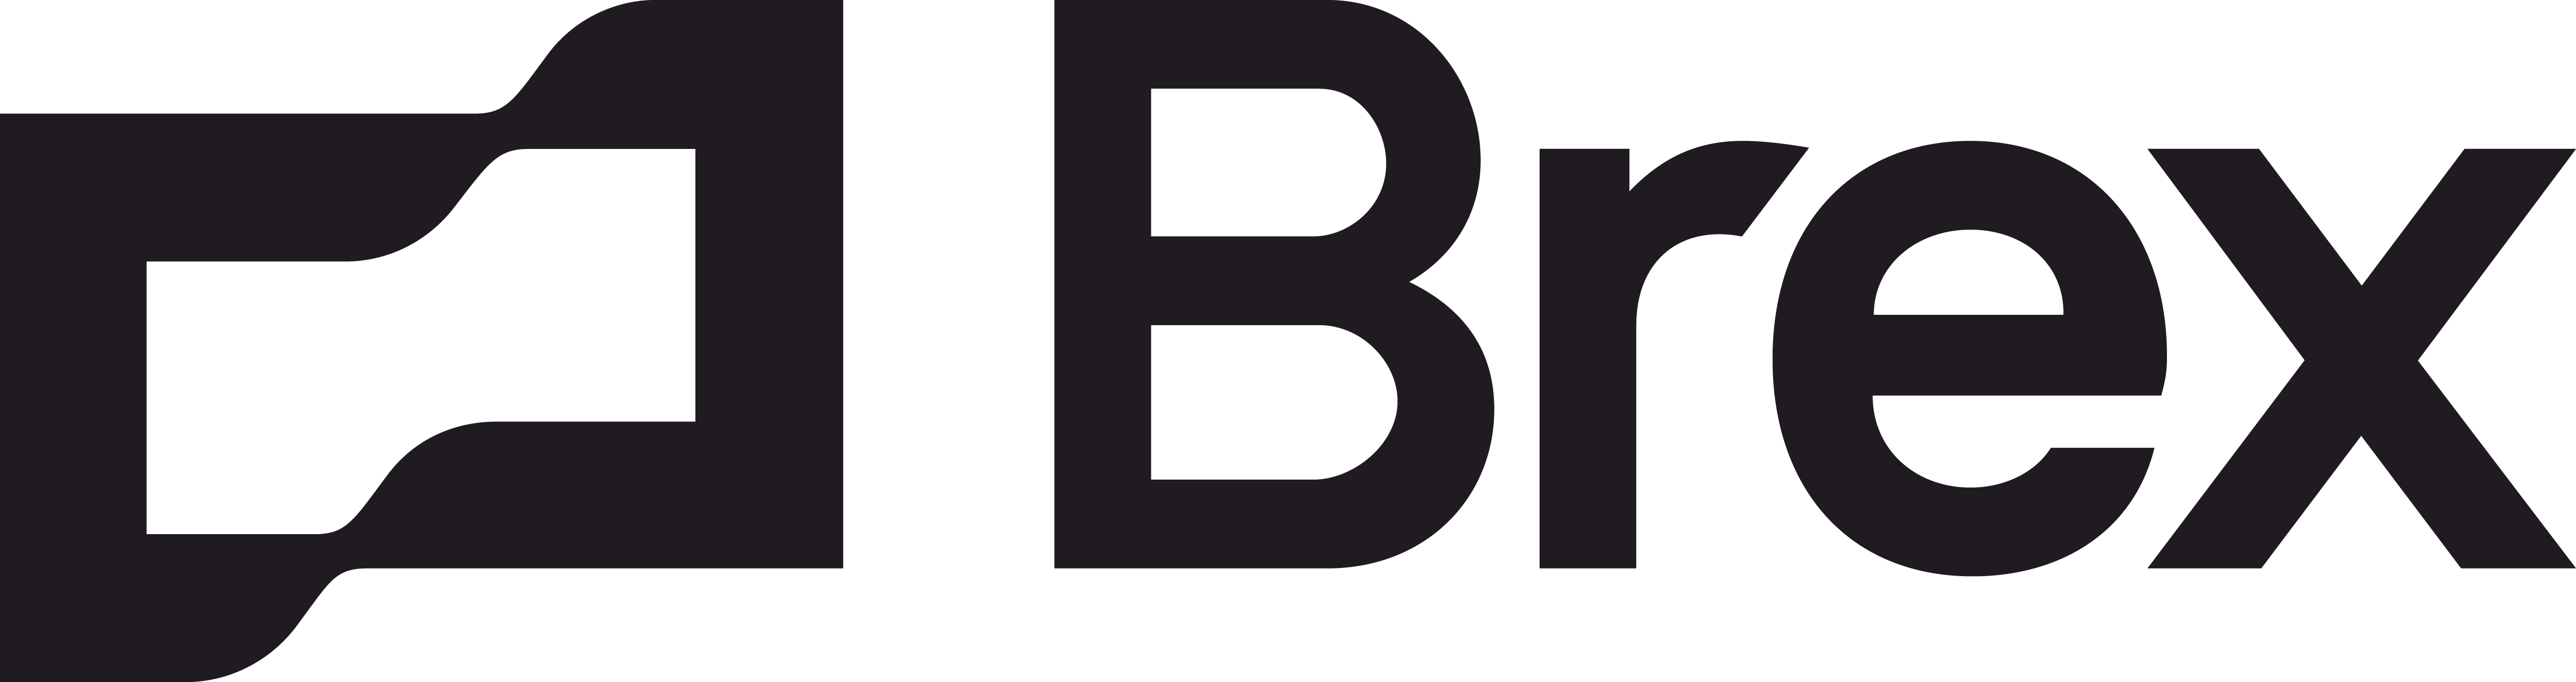 File:Brex Inc. Corporate Logo.png - Wikimedia Commons